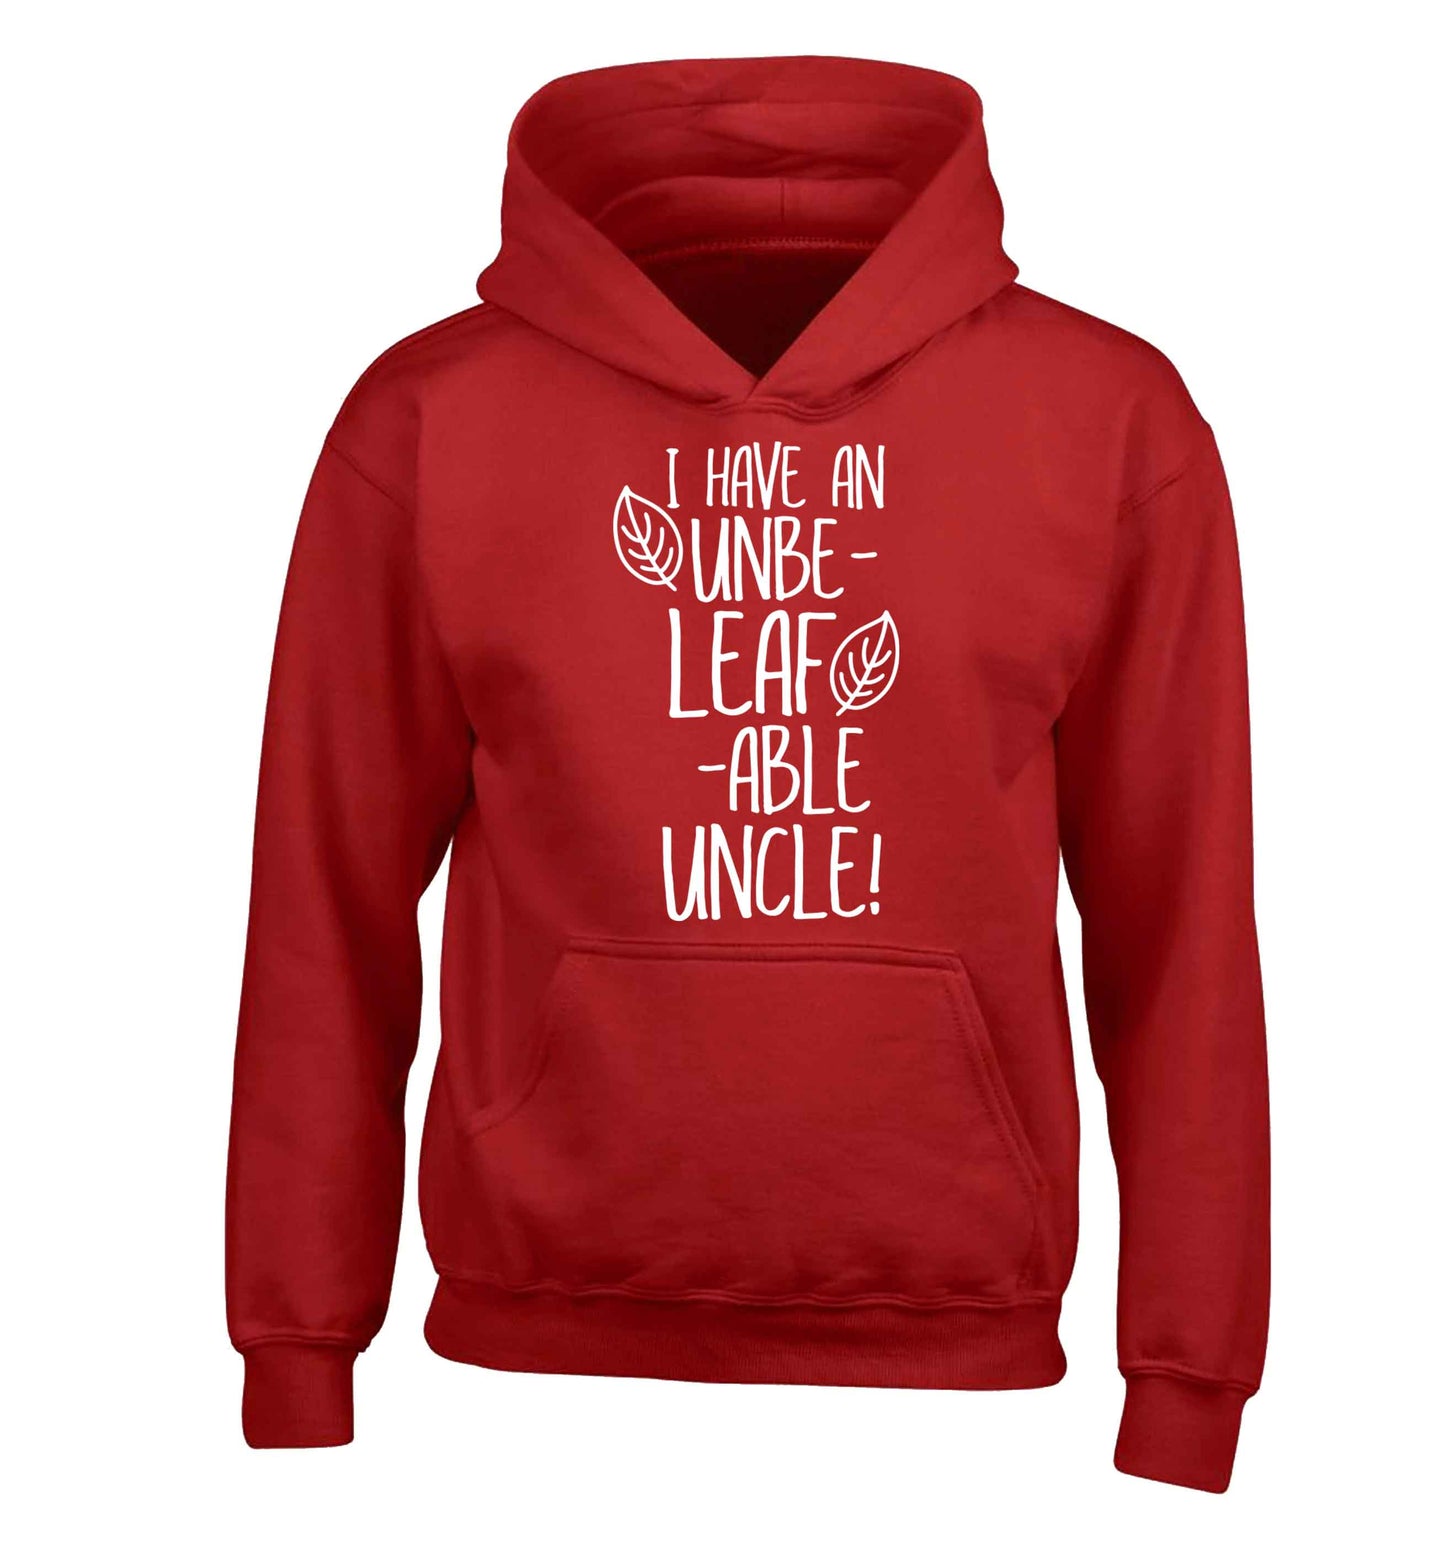 I have an unbe-leaf-able uncle children's red hoodie 12-13 Years